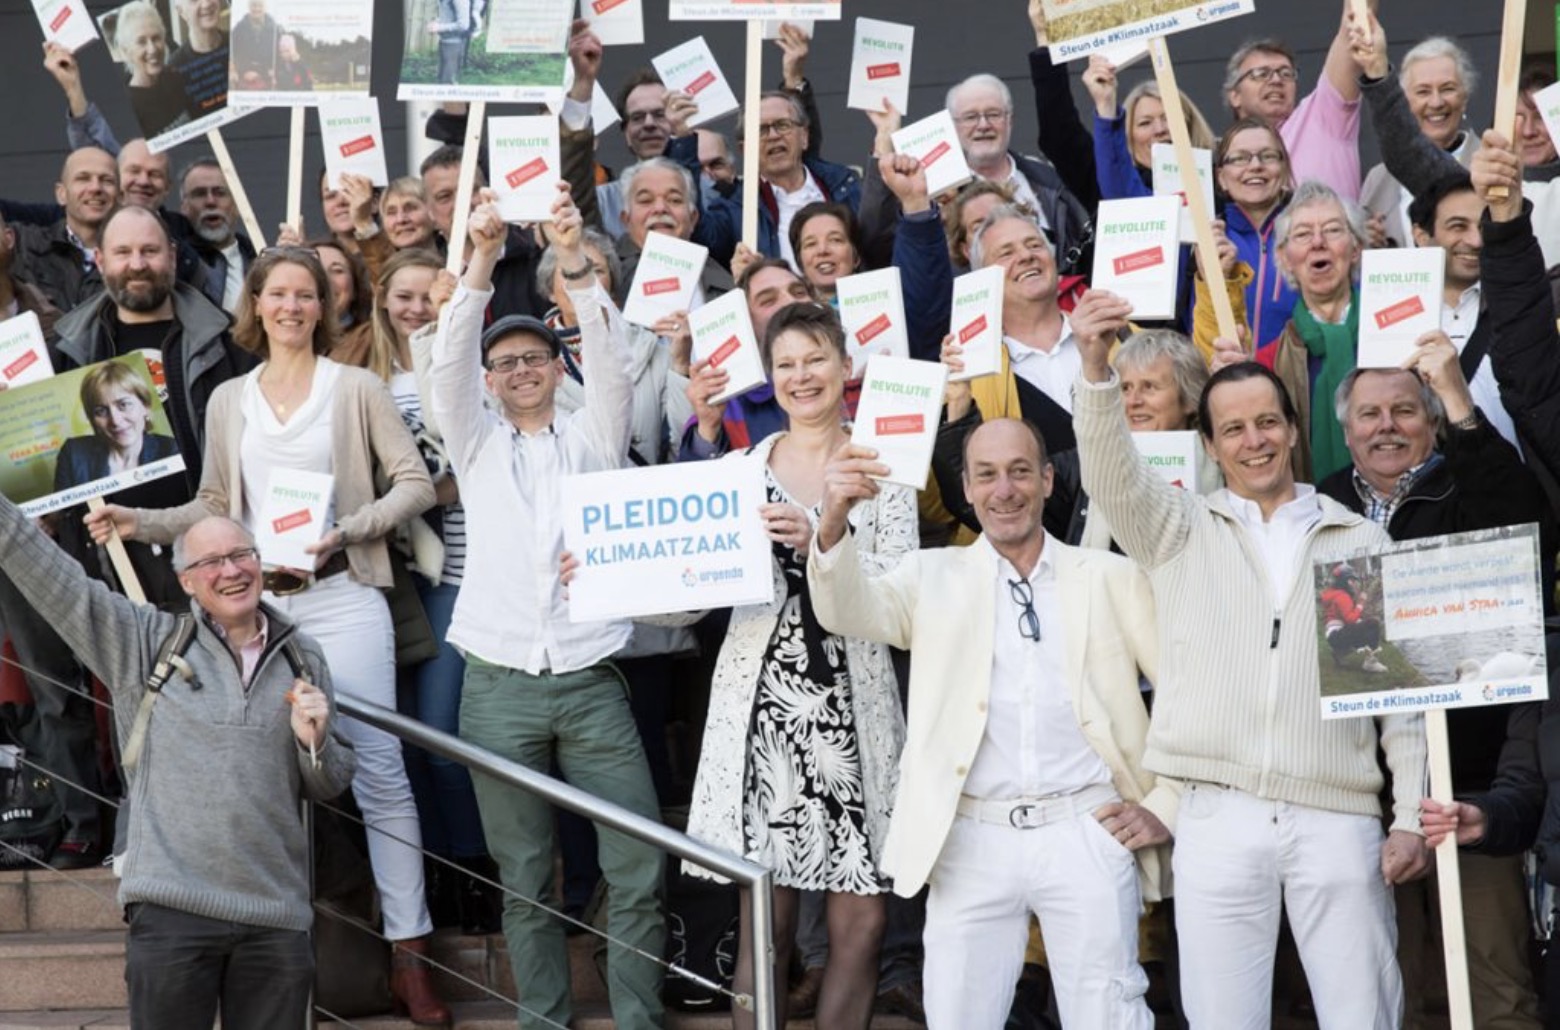 On 20 December 2019 the Dutch Supreme Court states that the Dutch government must reduce emissions immediately in line with its human rights obligations. Happy campaigners celebrate the ruling on the steps of the court. A historic victory for climate justice